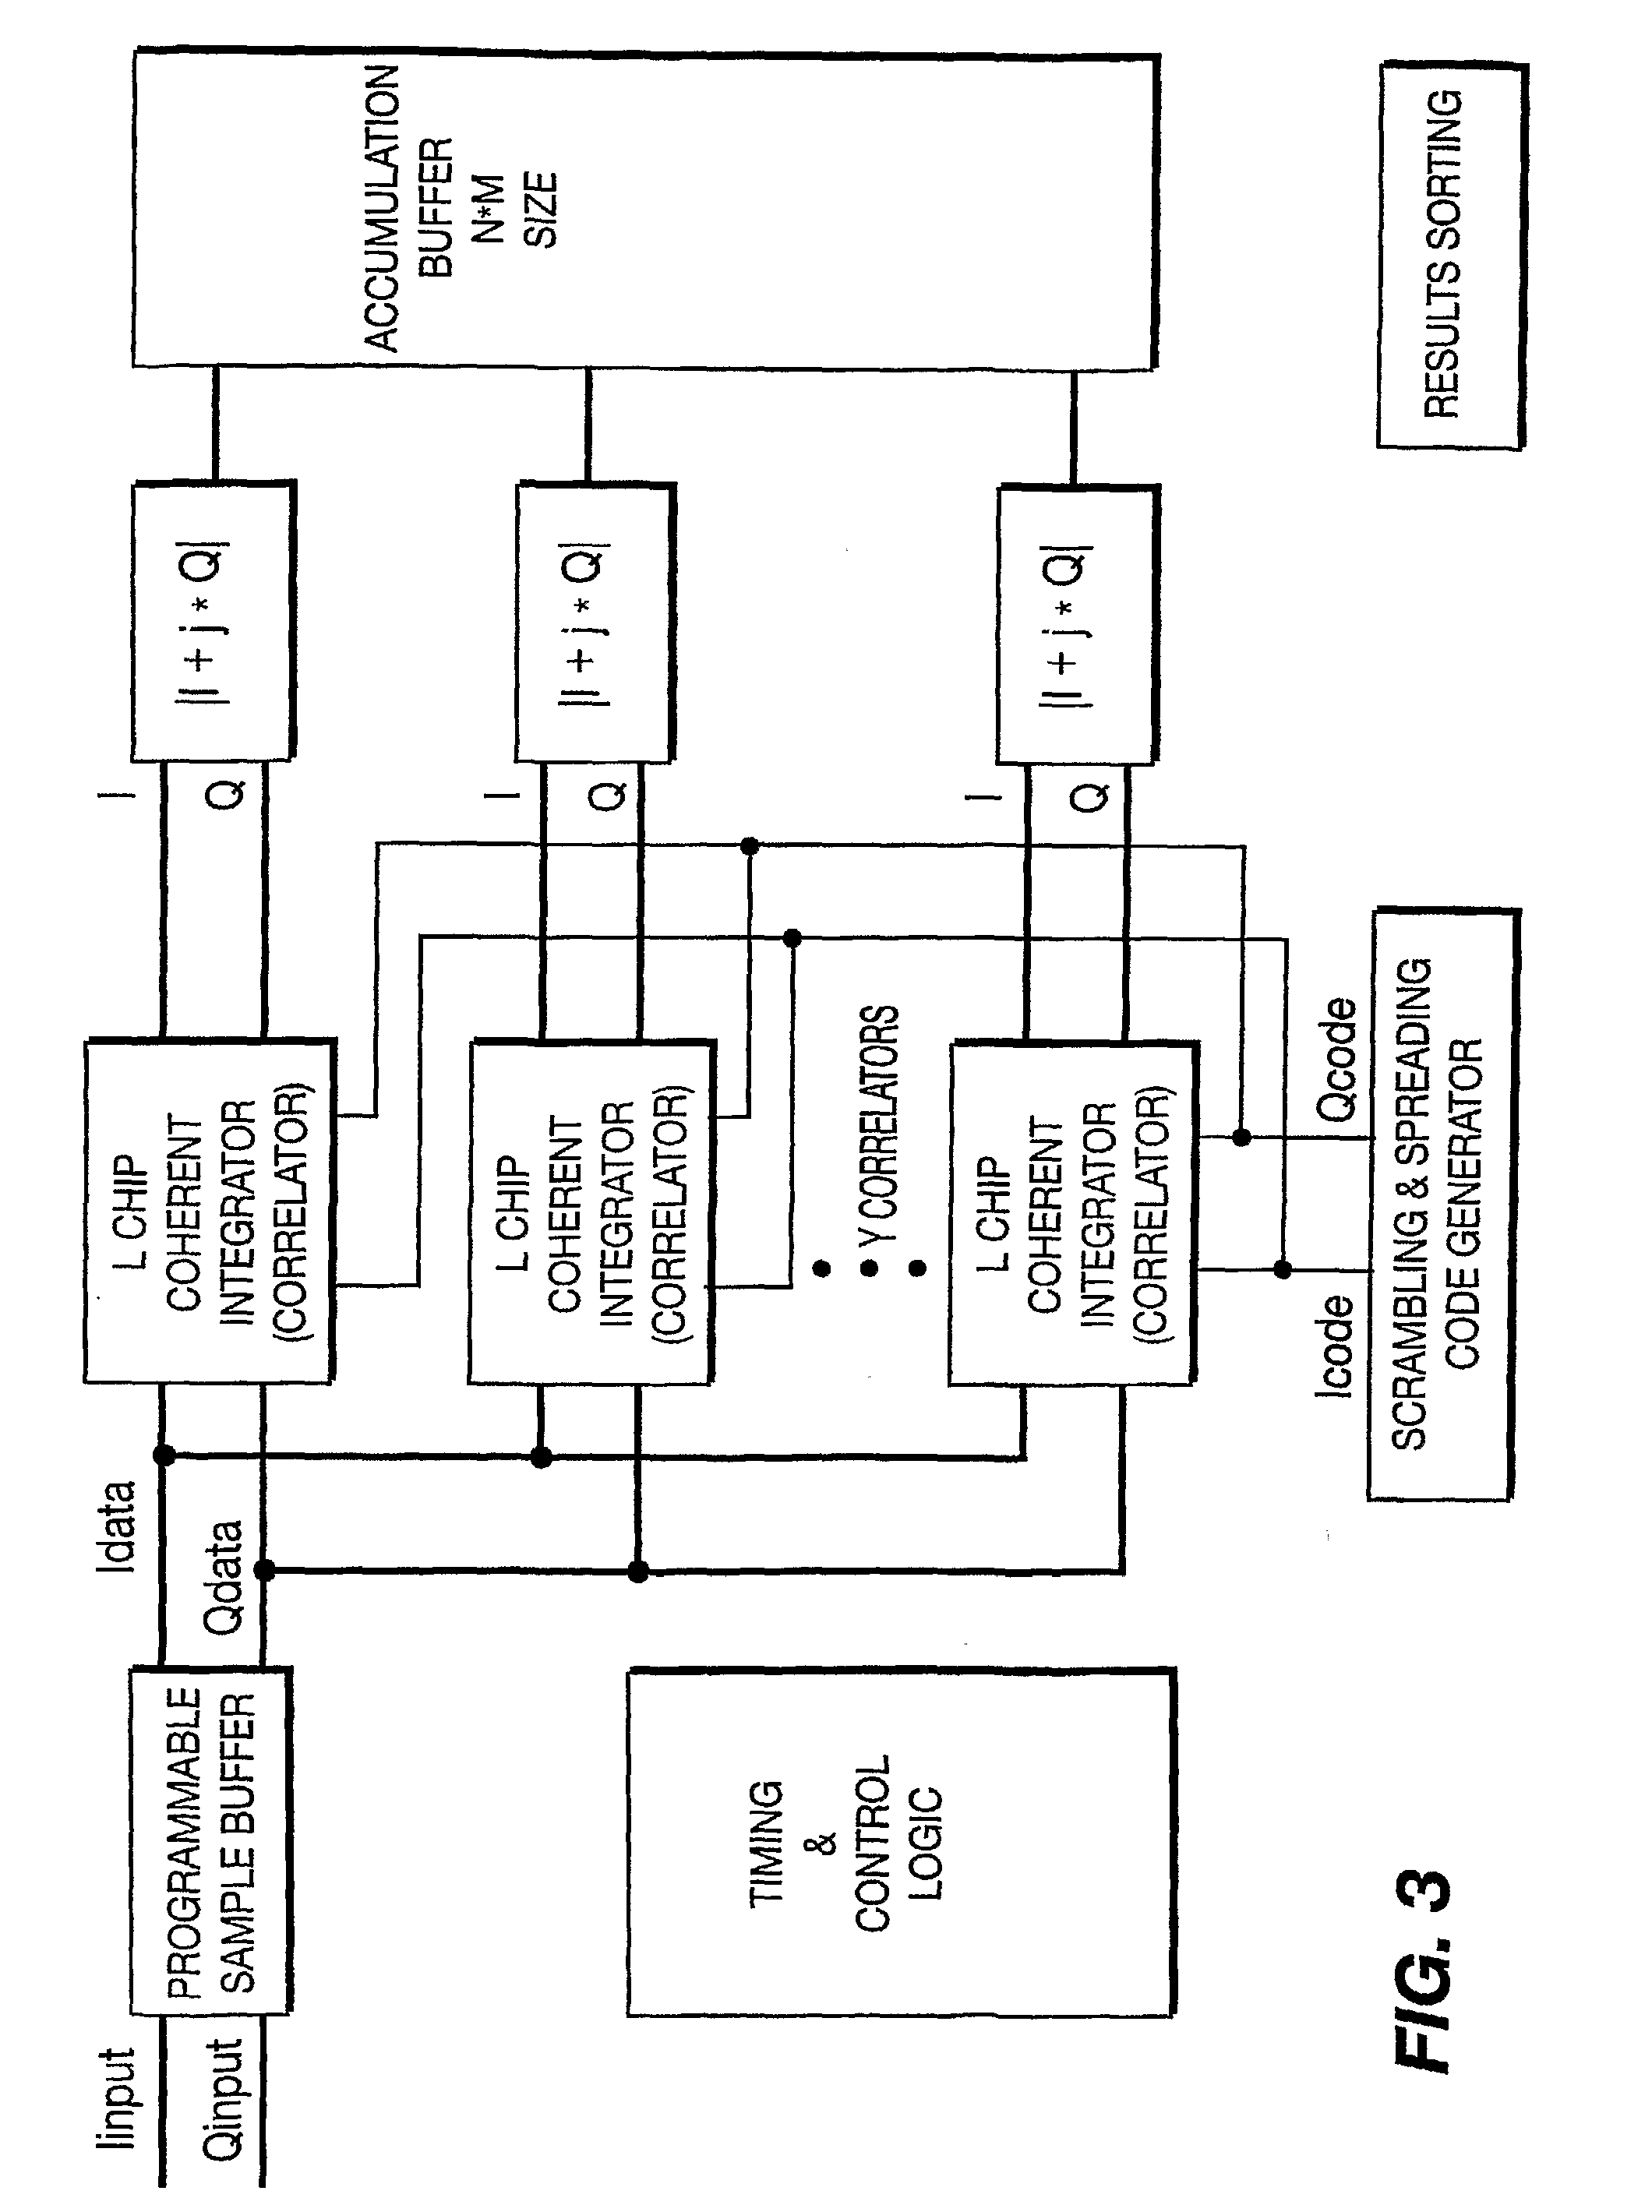 Time Multiplexed Non-Coherent Multipath Search Method and Apparatus